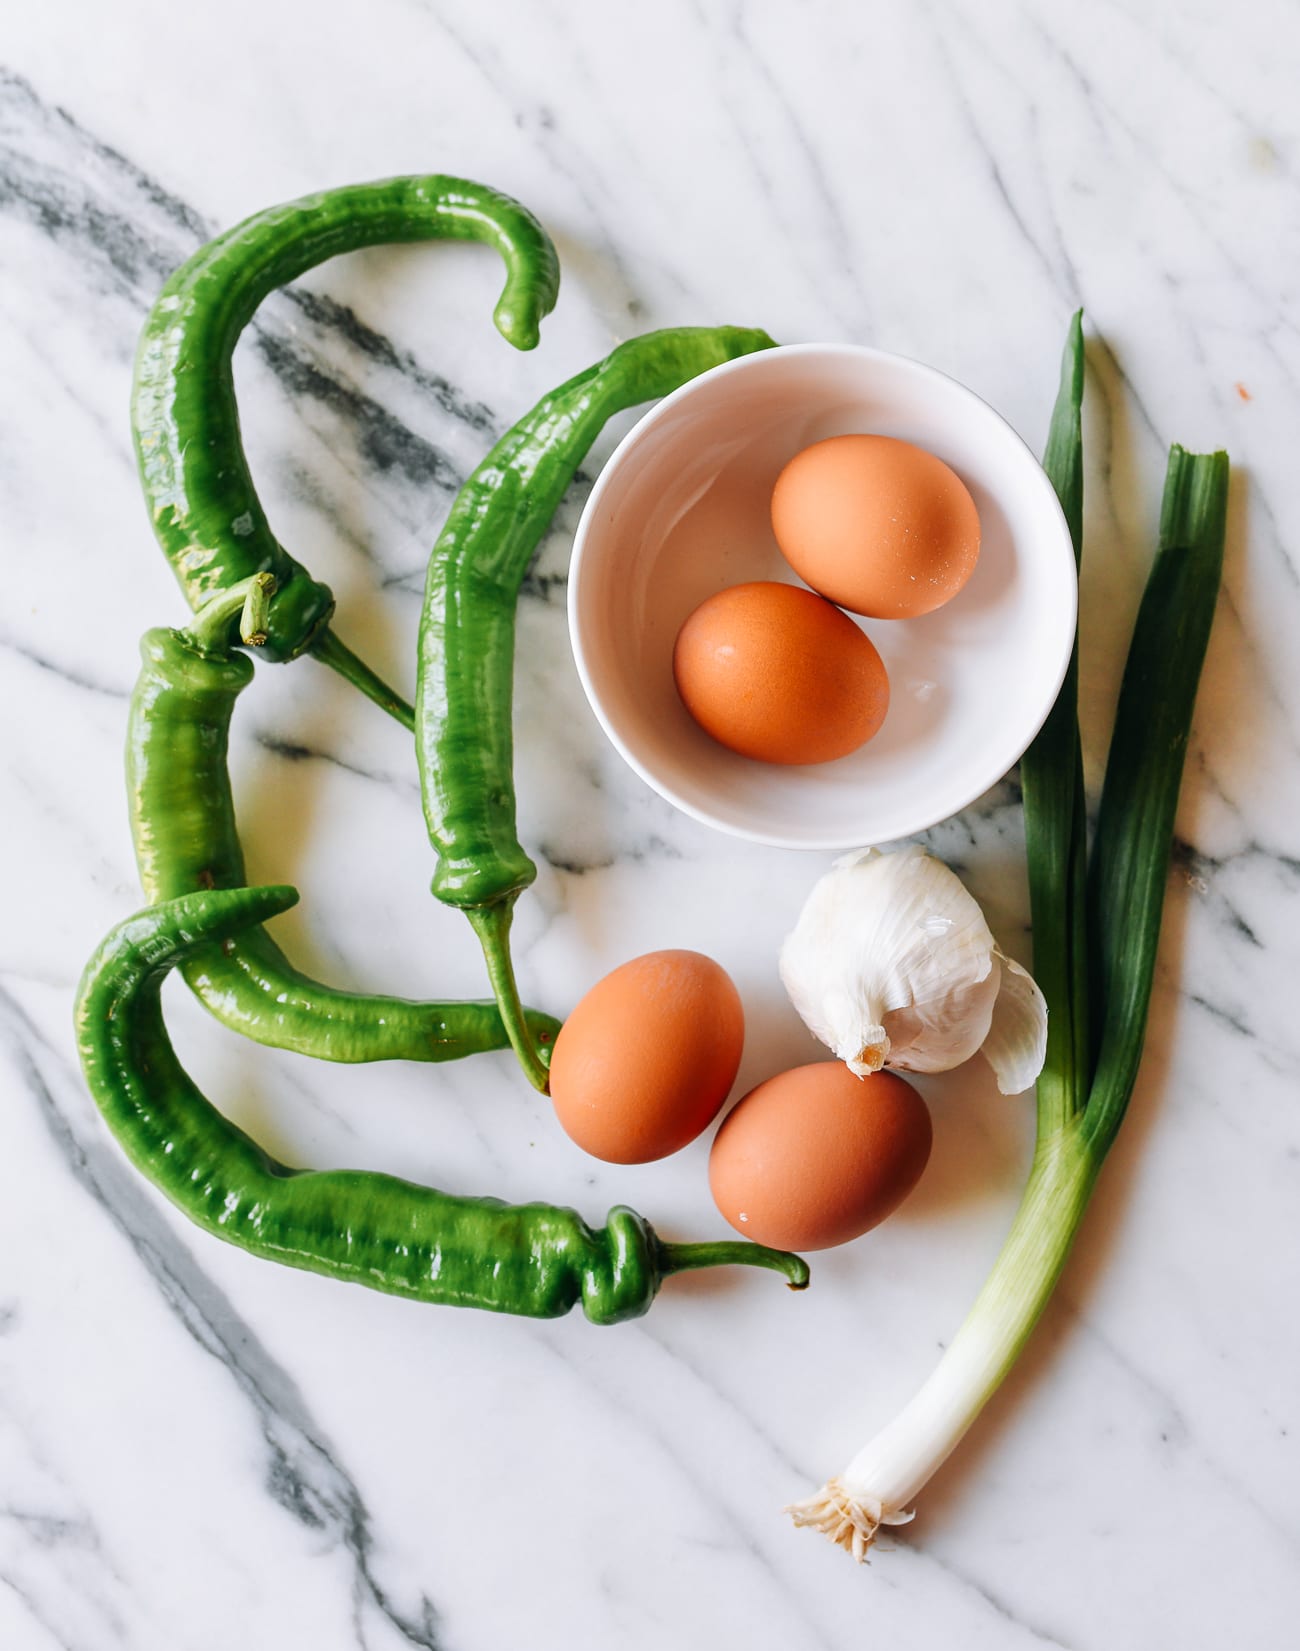 Ingredients for egg stir-fry with peppers